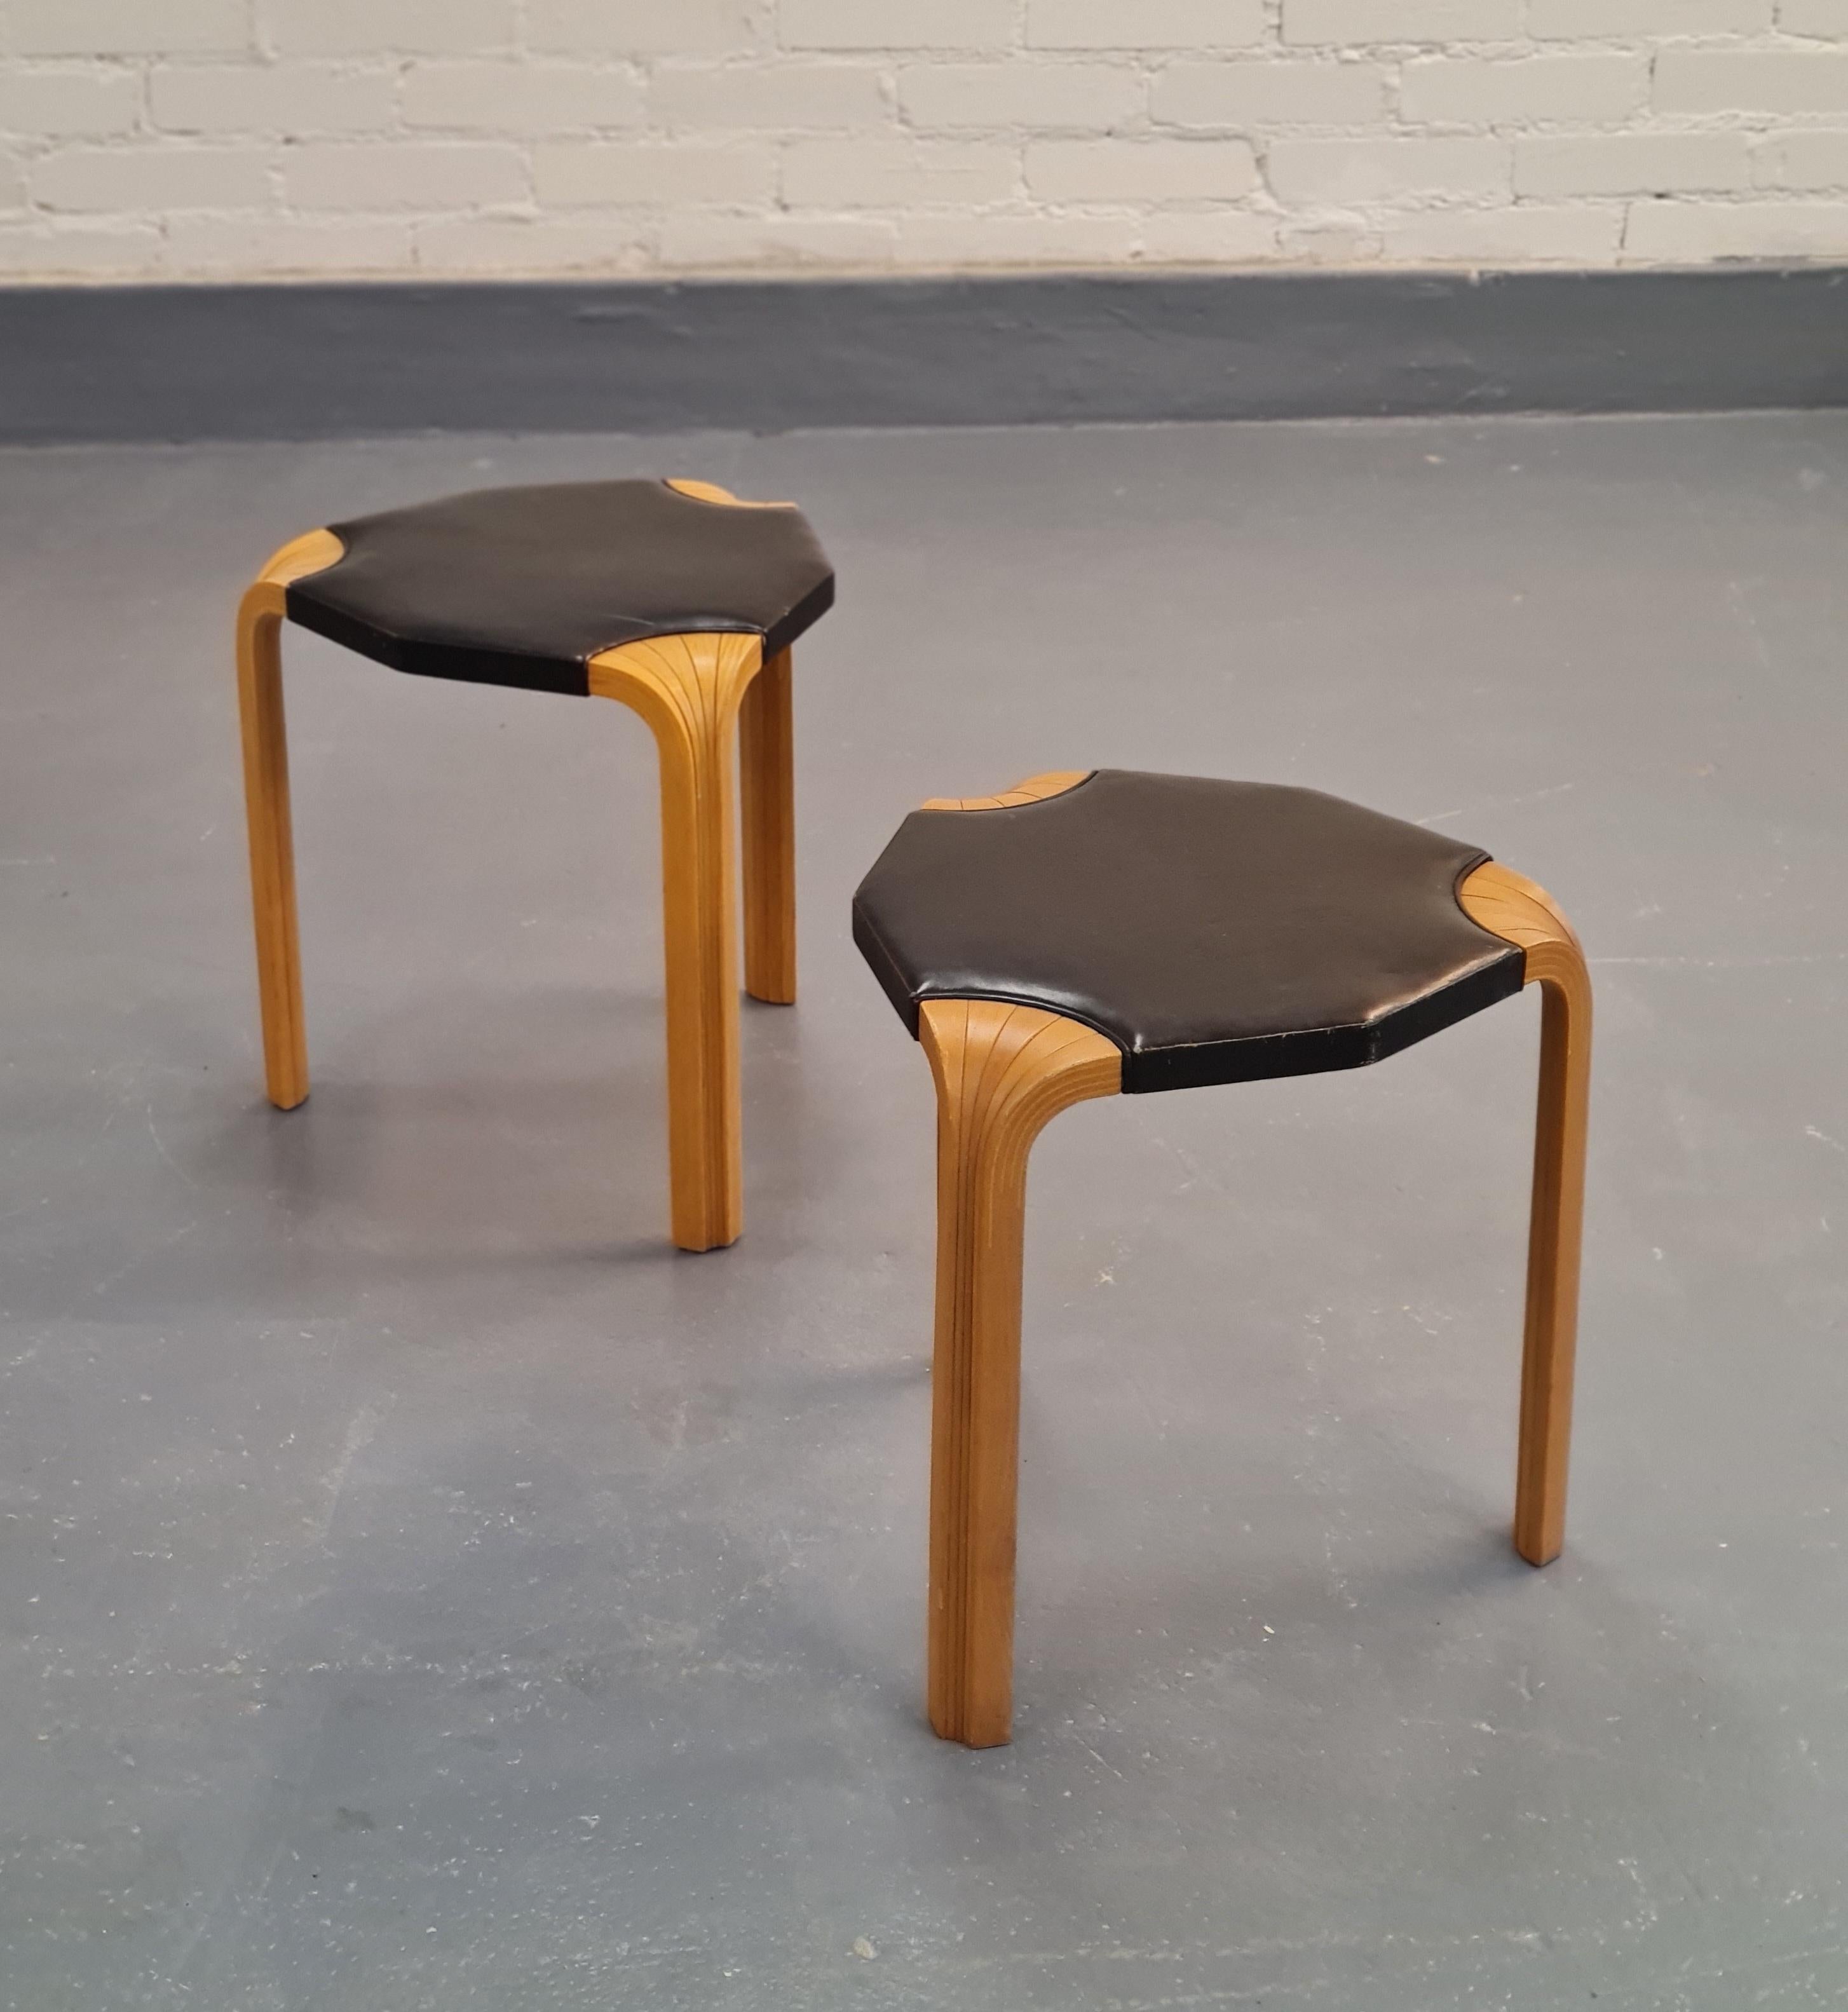 Even though simple, these stool come with great quality and attention to details. The less common X-leg with the leather padding brings plain beauty. This stool comes in beautiful patinated condition with some signs of usage.